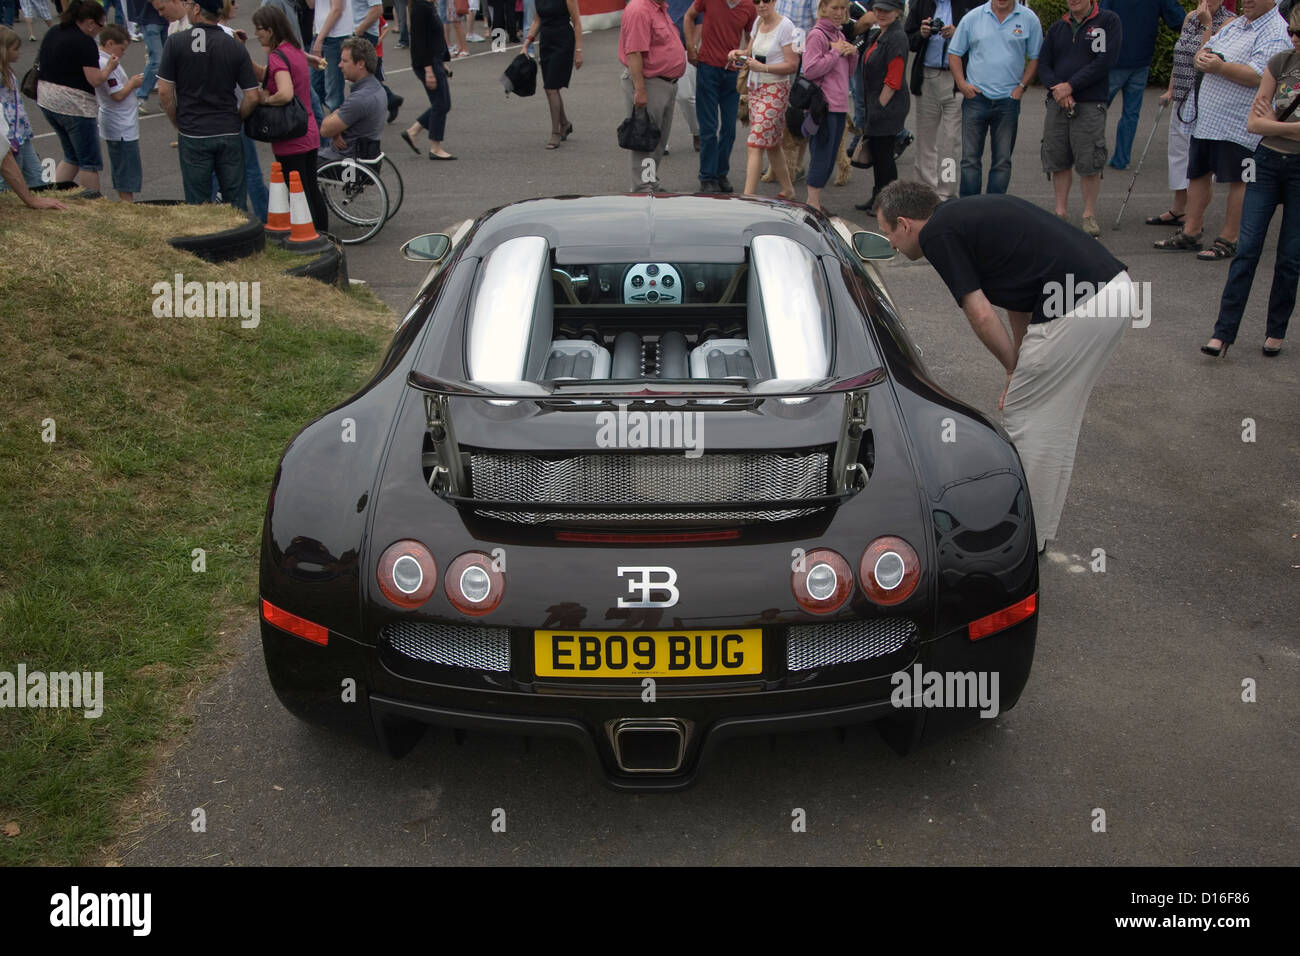 A crowd of people gathering around a Bugatti Veyron at a classic car show. Stock Photo